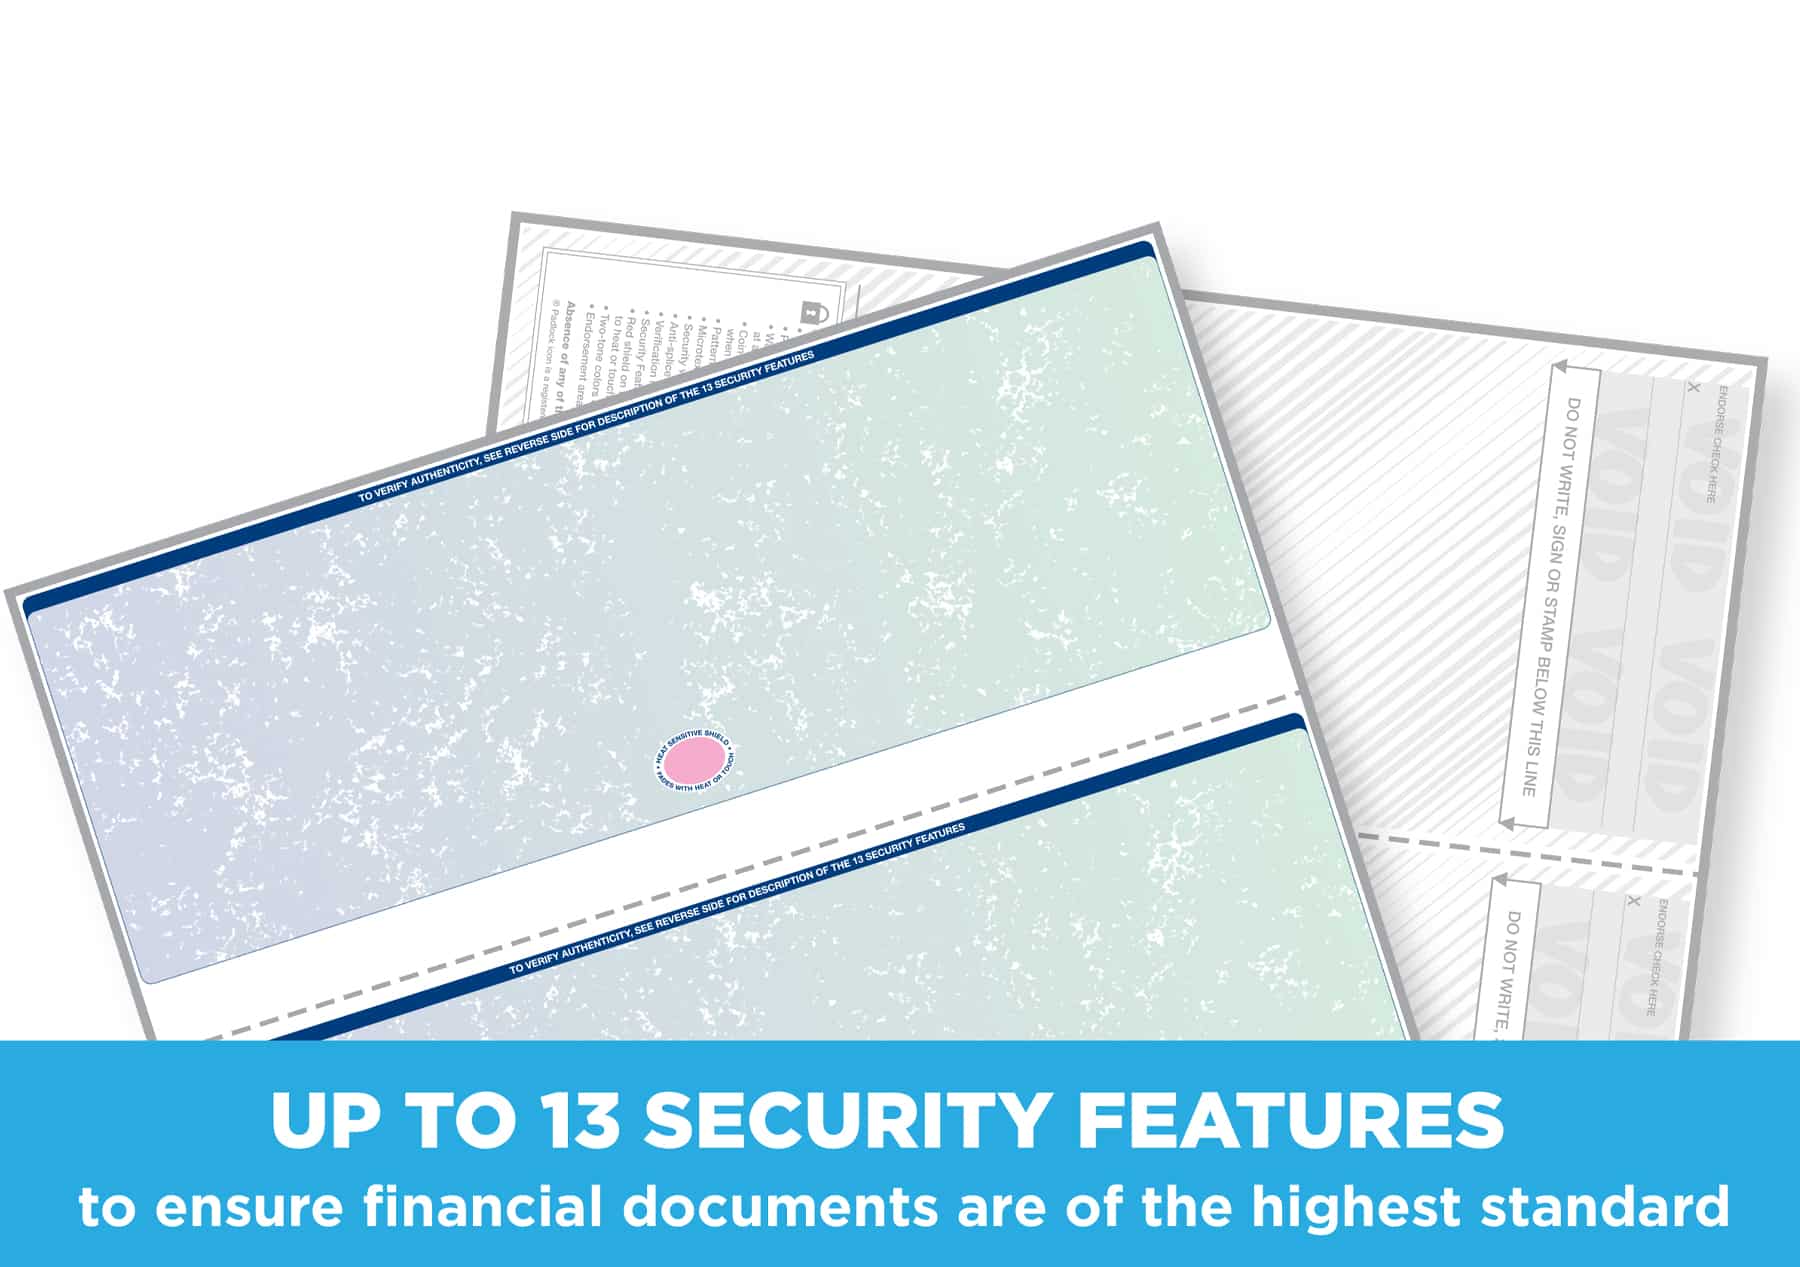 Up to 13 Security Features